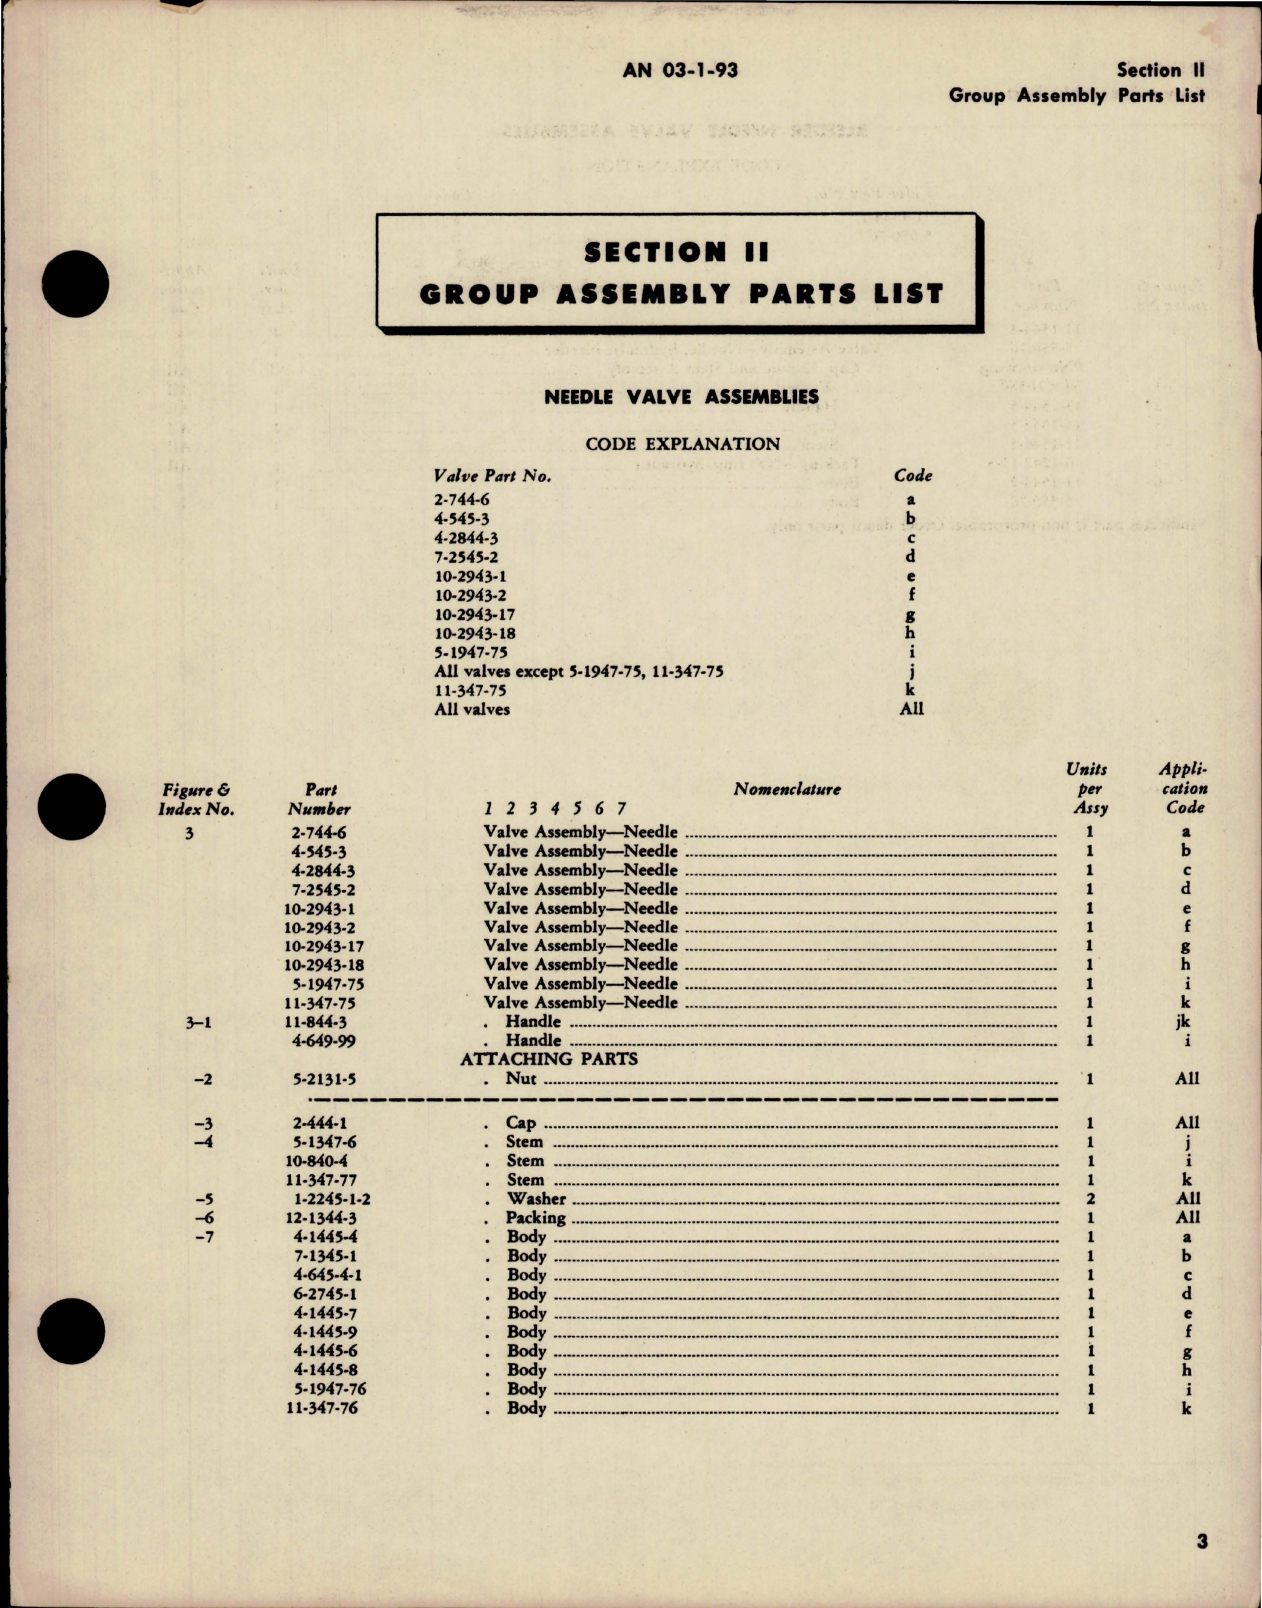 Sample page 5 from AirCorps Library document: Needle Valve Assemblies 